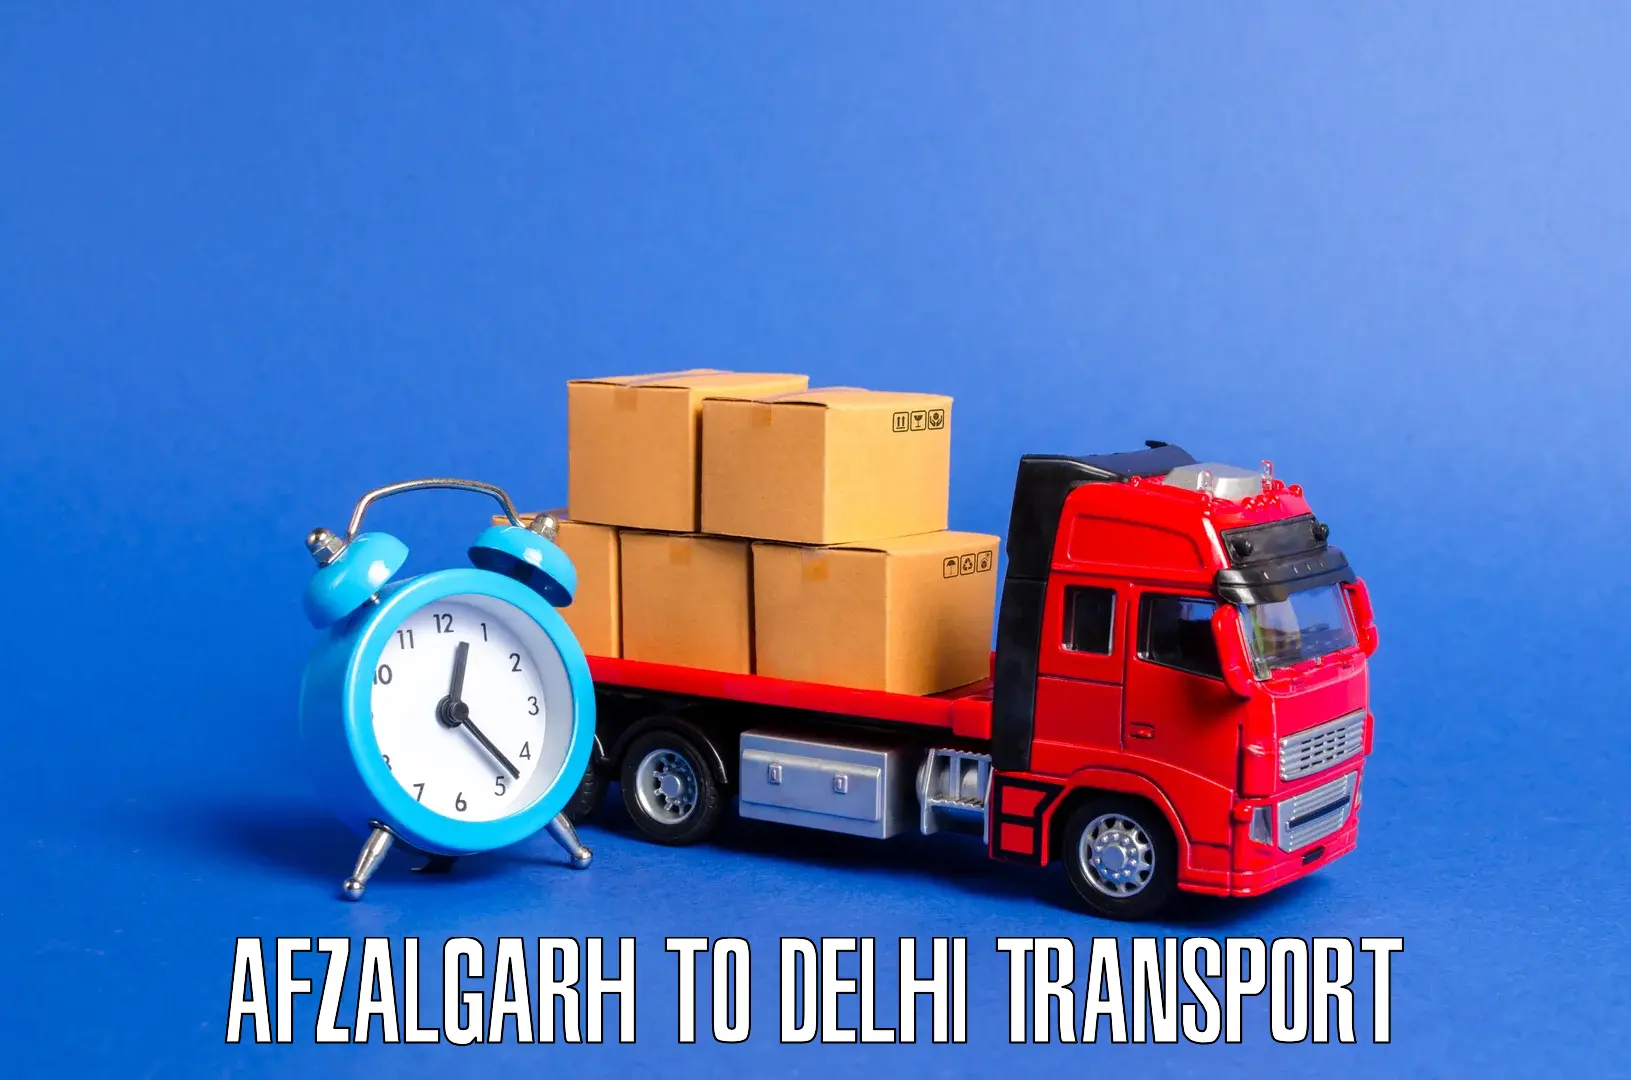 Nearby transport service Afzalgarh to Lodhi Road